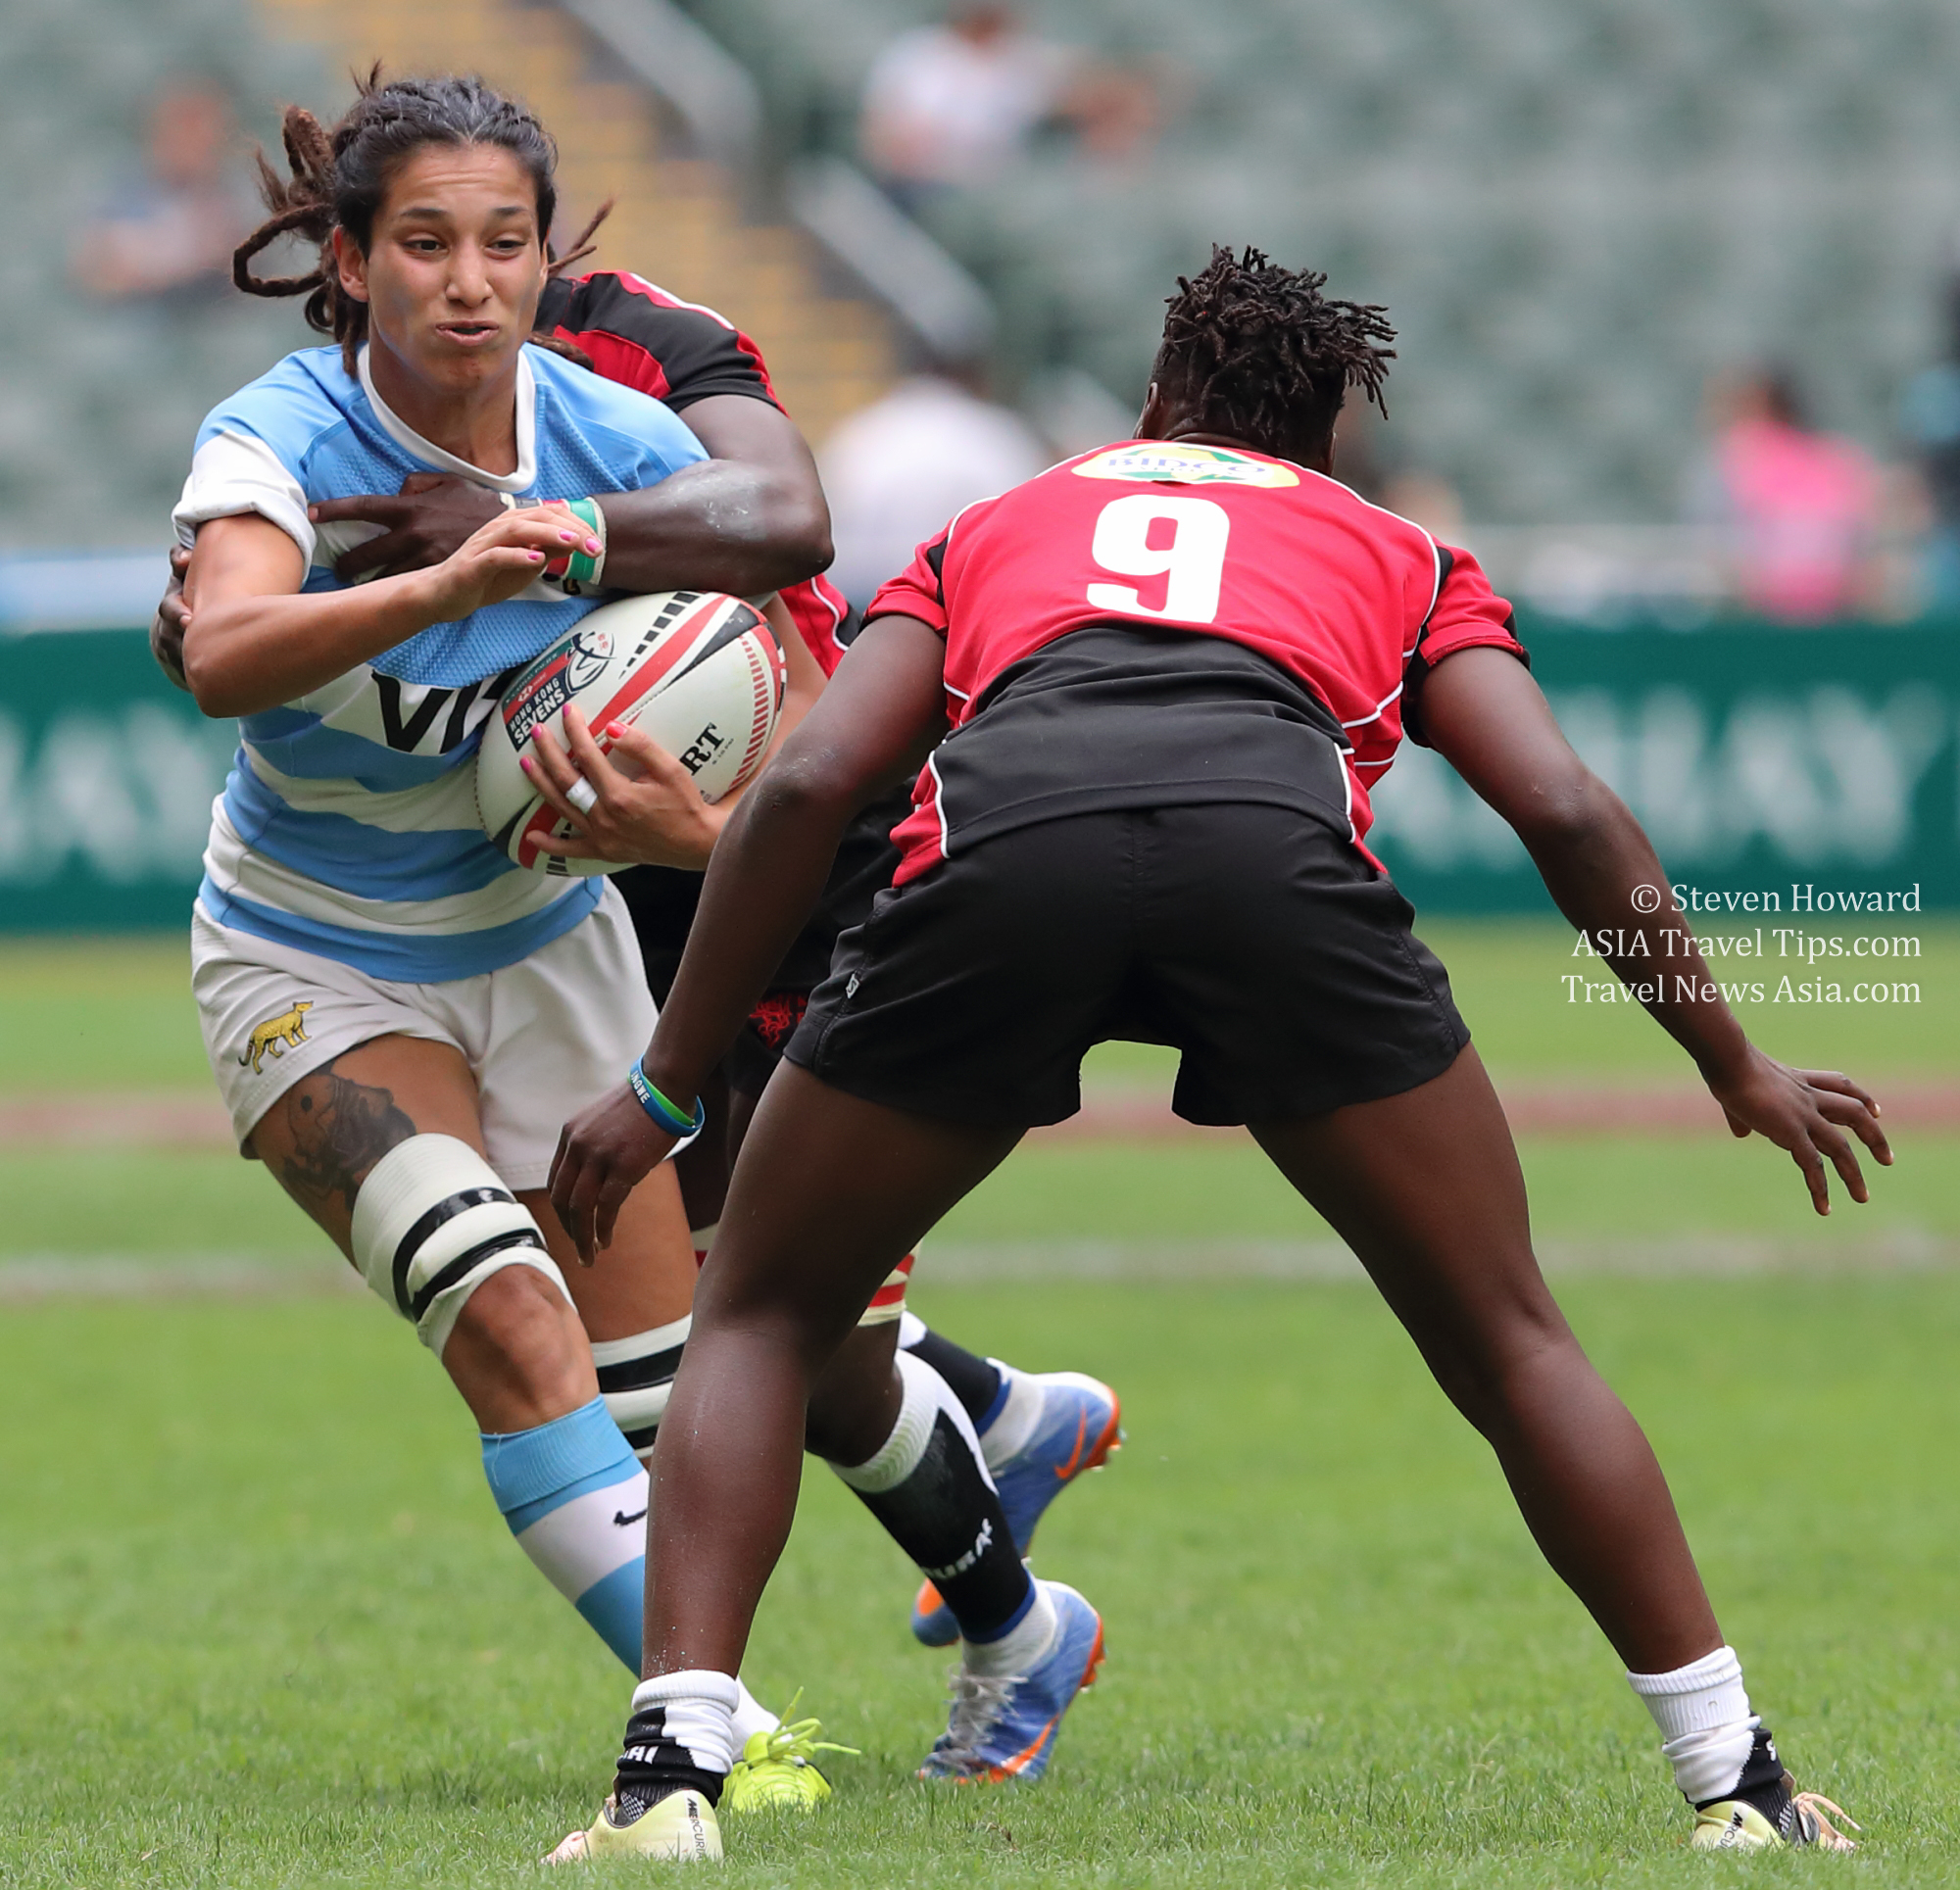 Action from the Cathay Pacific / HSBC Hong Kong Sevens 2018. Picture by Steven Howard of TravelNewsAsia.com Click to enlarge.